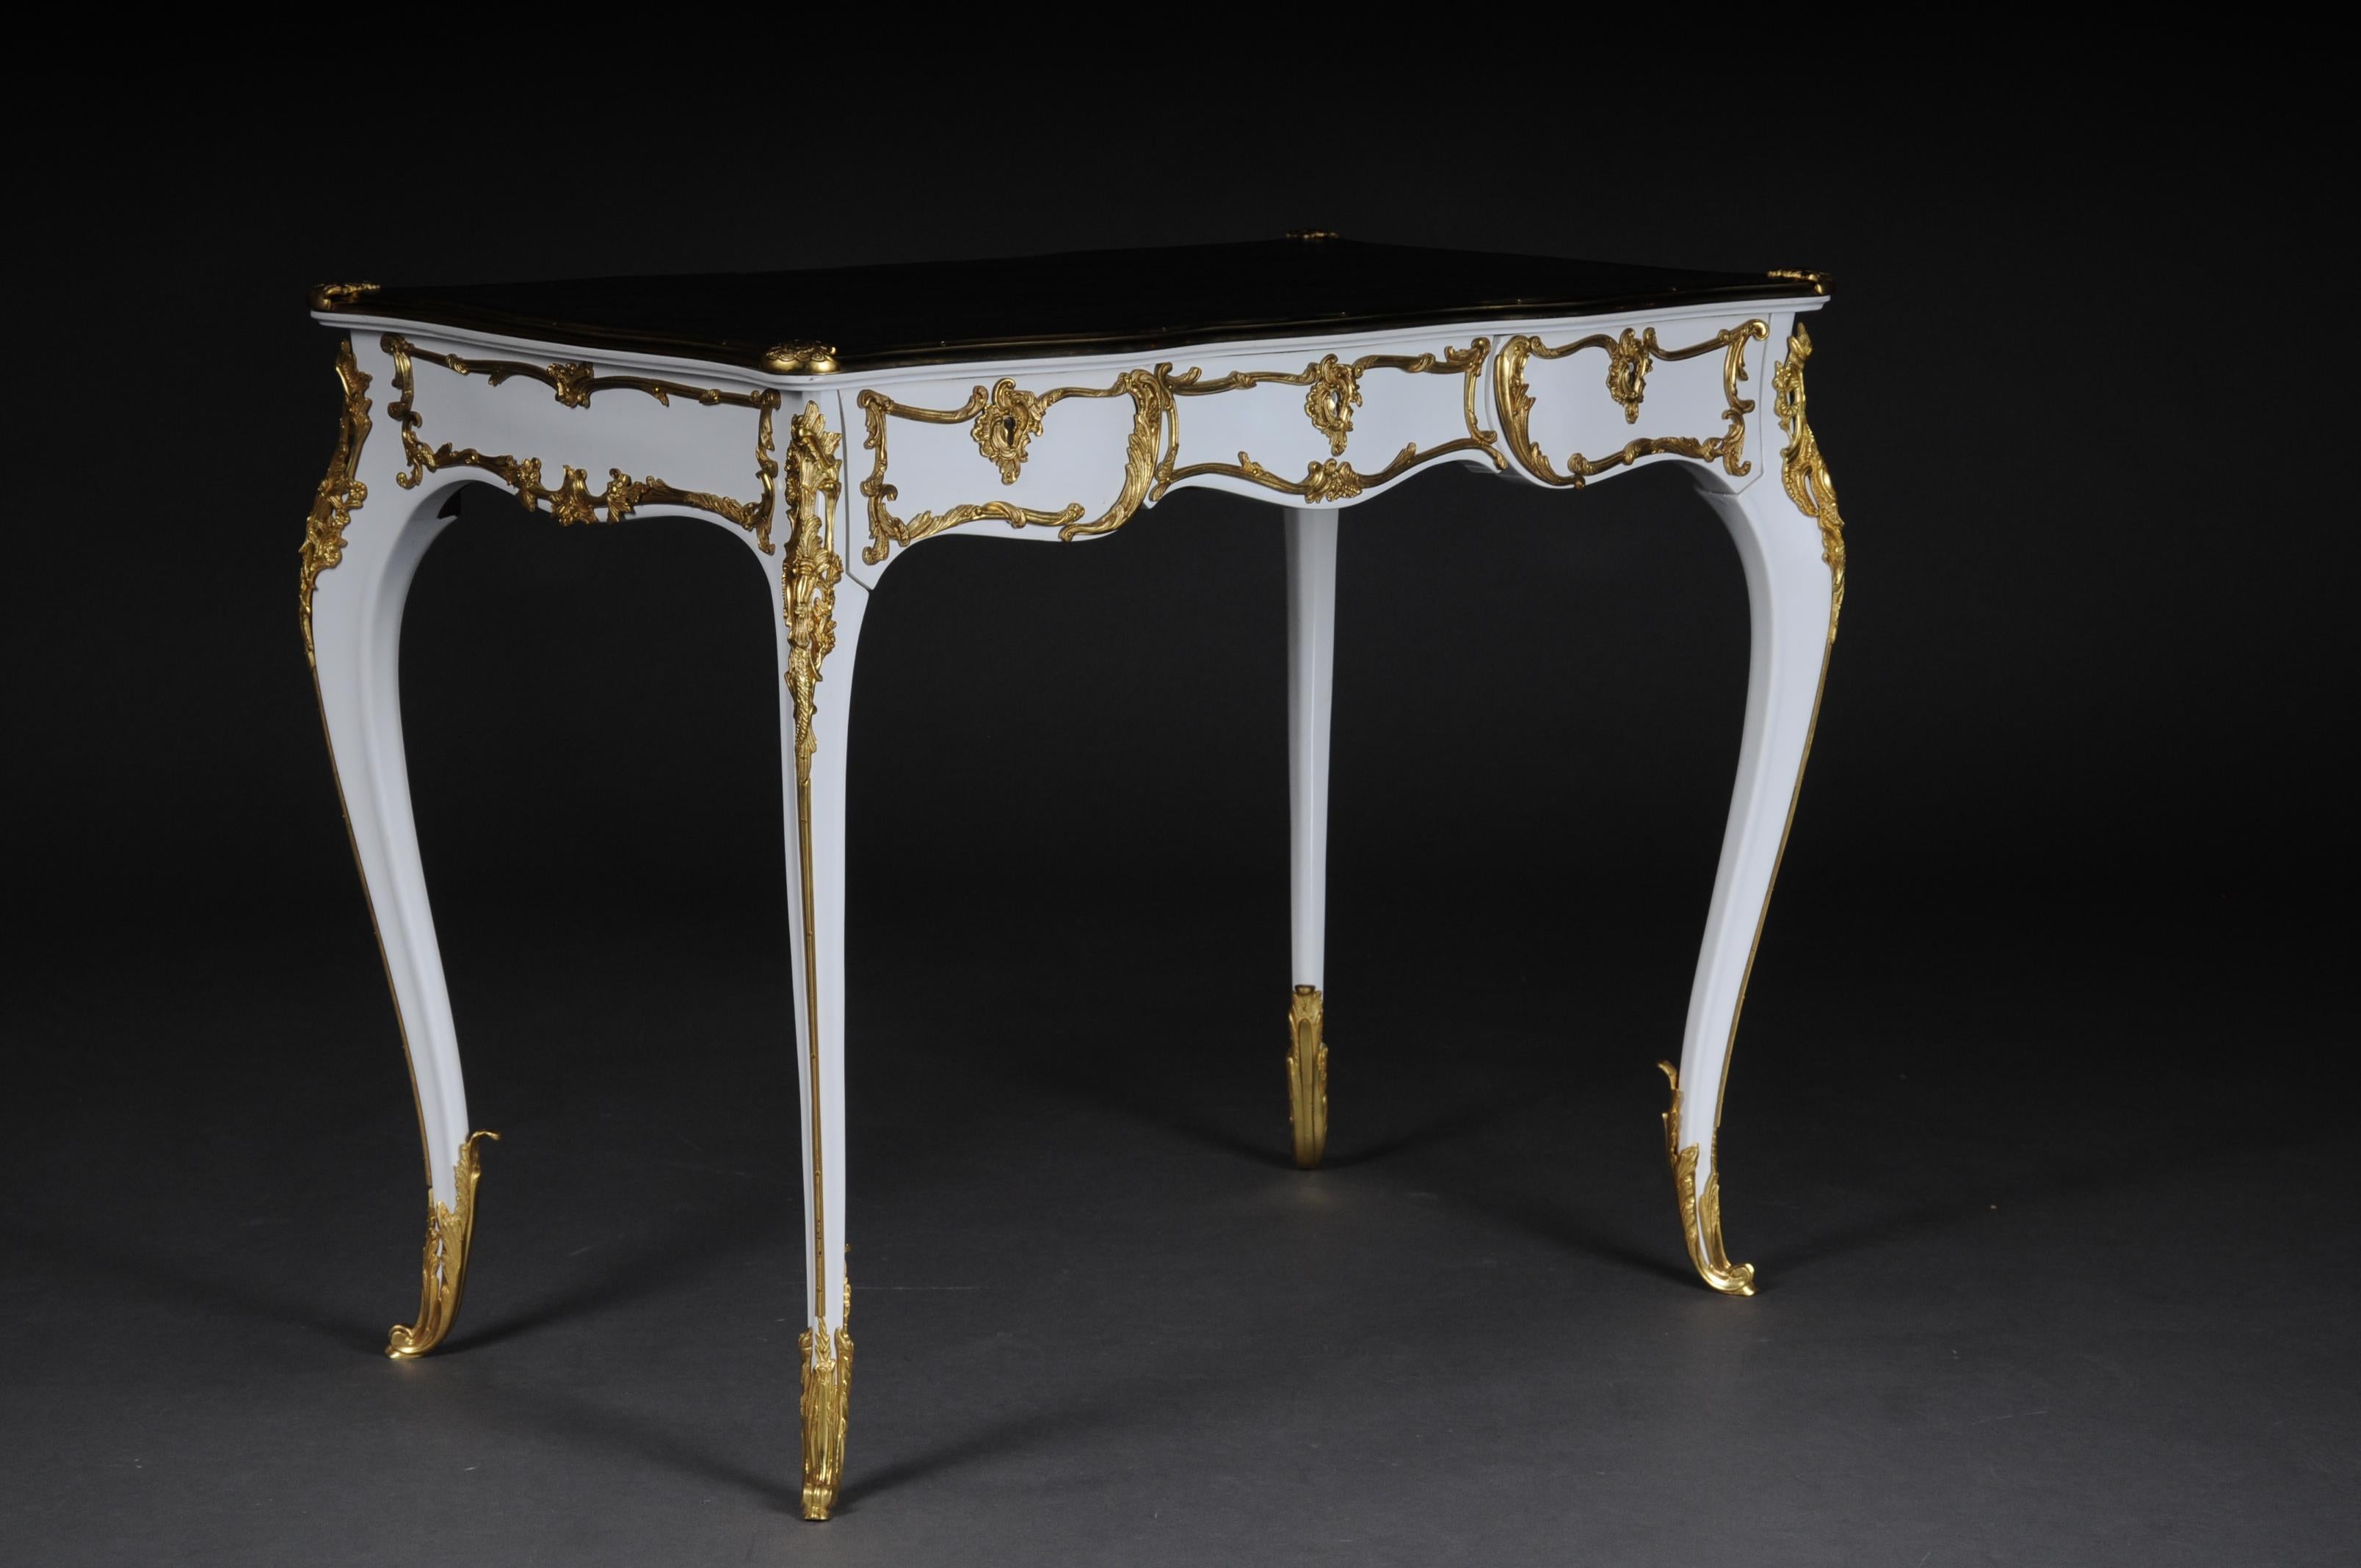 20th century luxurious white bureau plat / writing desk in Louis XV style

Solid beechwood colored in white. Very fine, floral bronze fittings.
Curved and pronounced / arched wooden body. Frame base with four-sided curvature.
3 drawers and wide